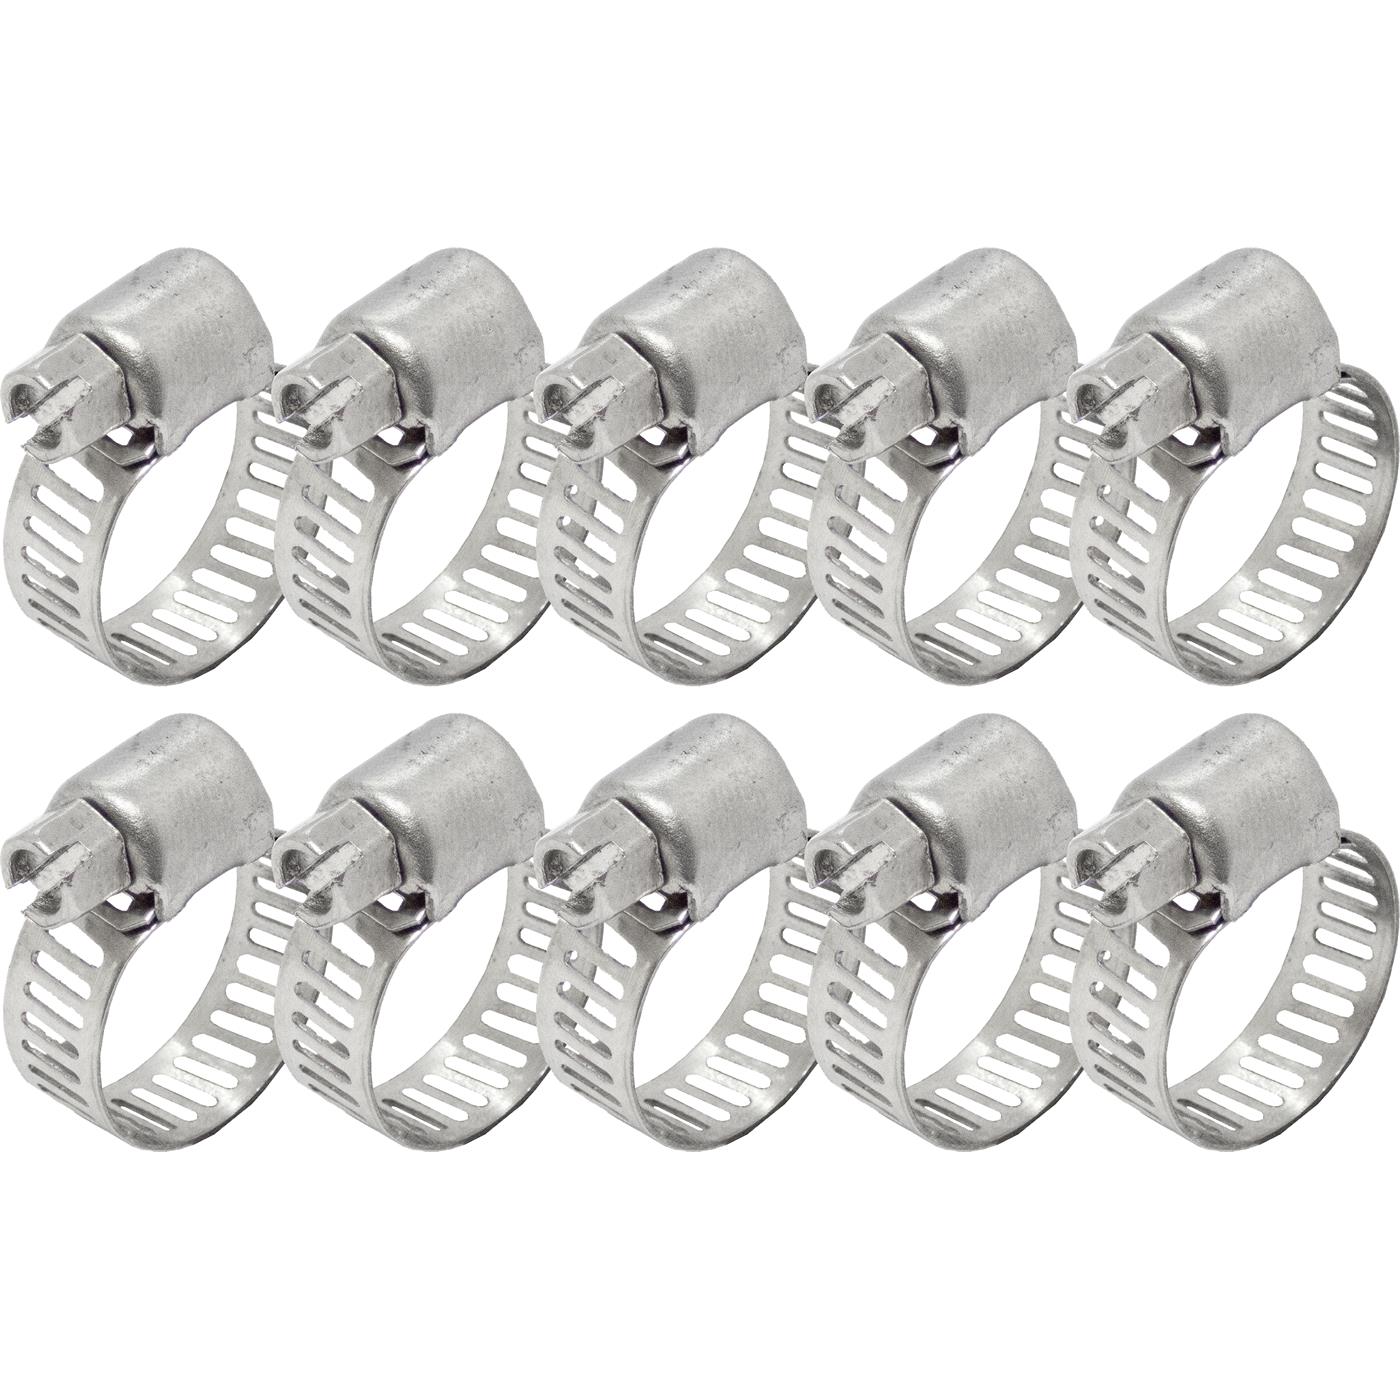 10x Hose clamp Stainless steel V4A 304 13-19mm Pipe clamp Hose clamp